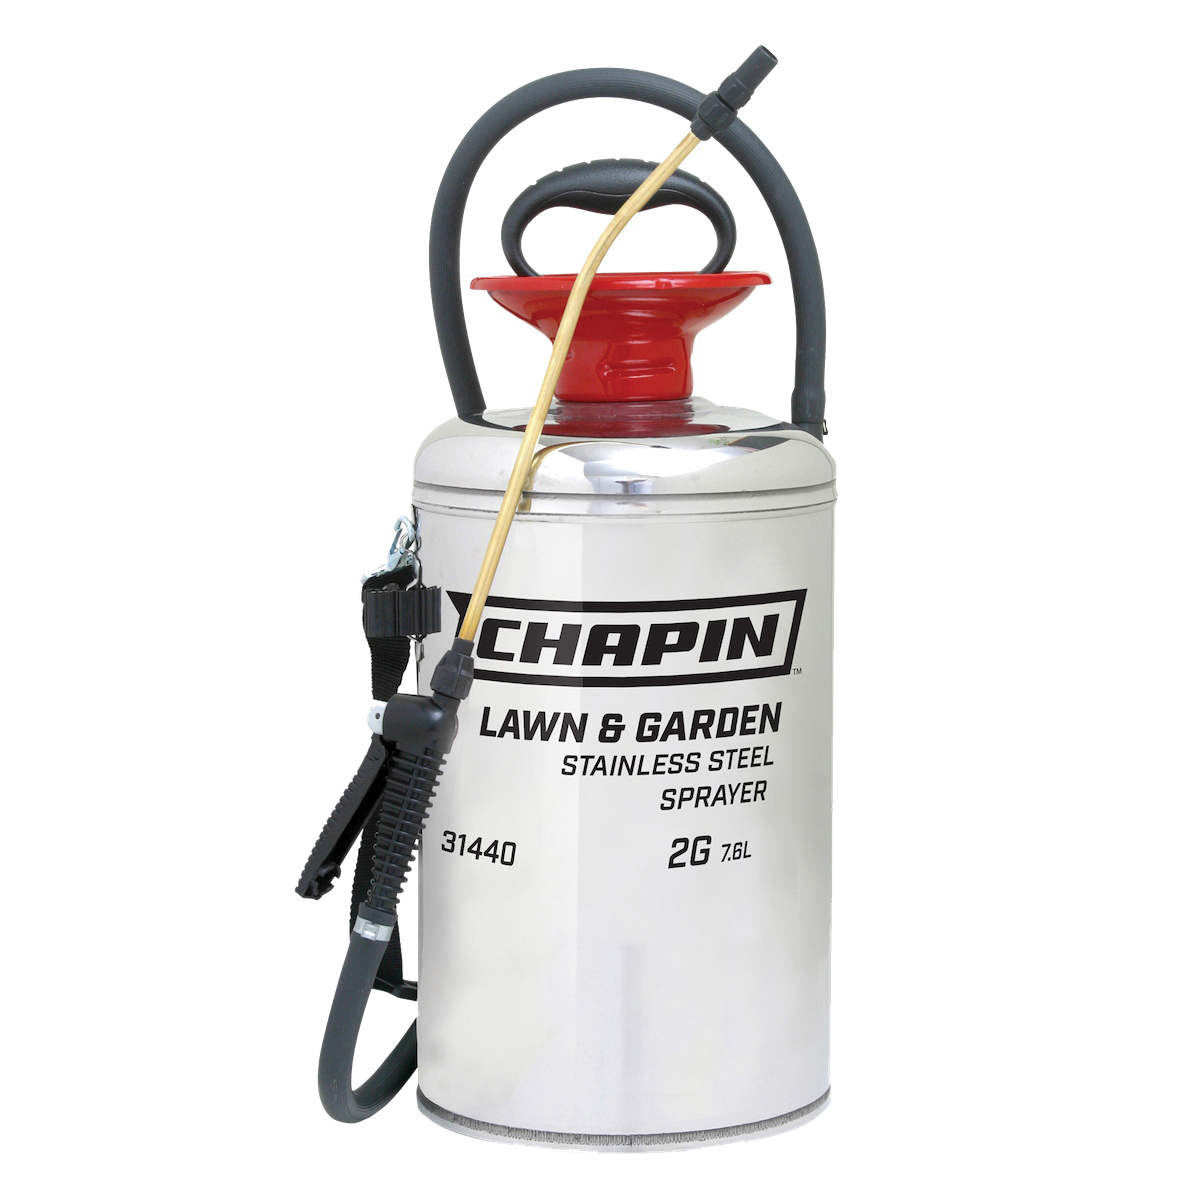 CHAPIN Lawn & Garden Series 31440 Compression Sprayer, 2 gal Tank, Stainless Steel Tank, 42 in L Hose